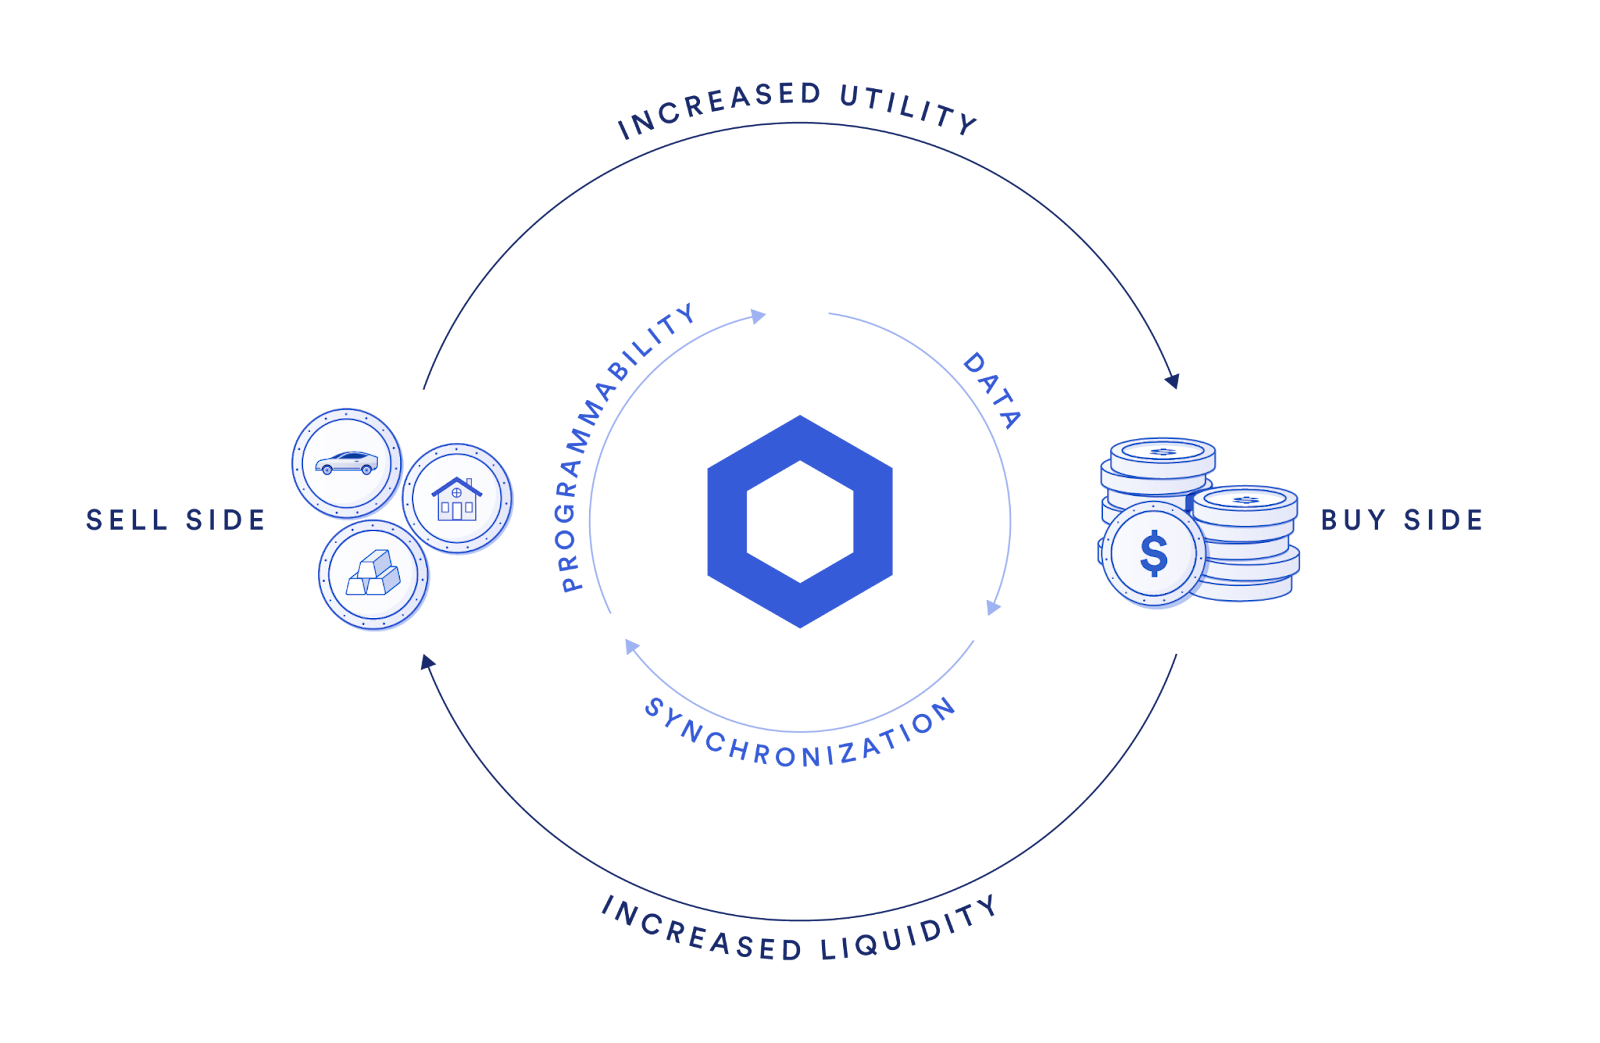 Chainlink increases the utility and liquidity of tokenized assets.